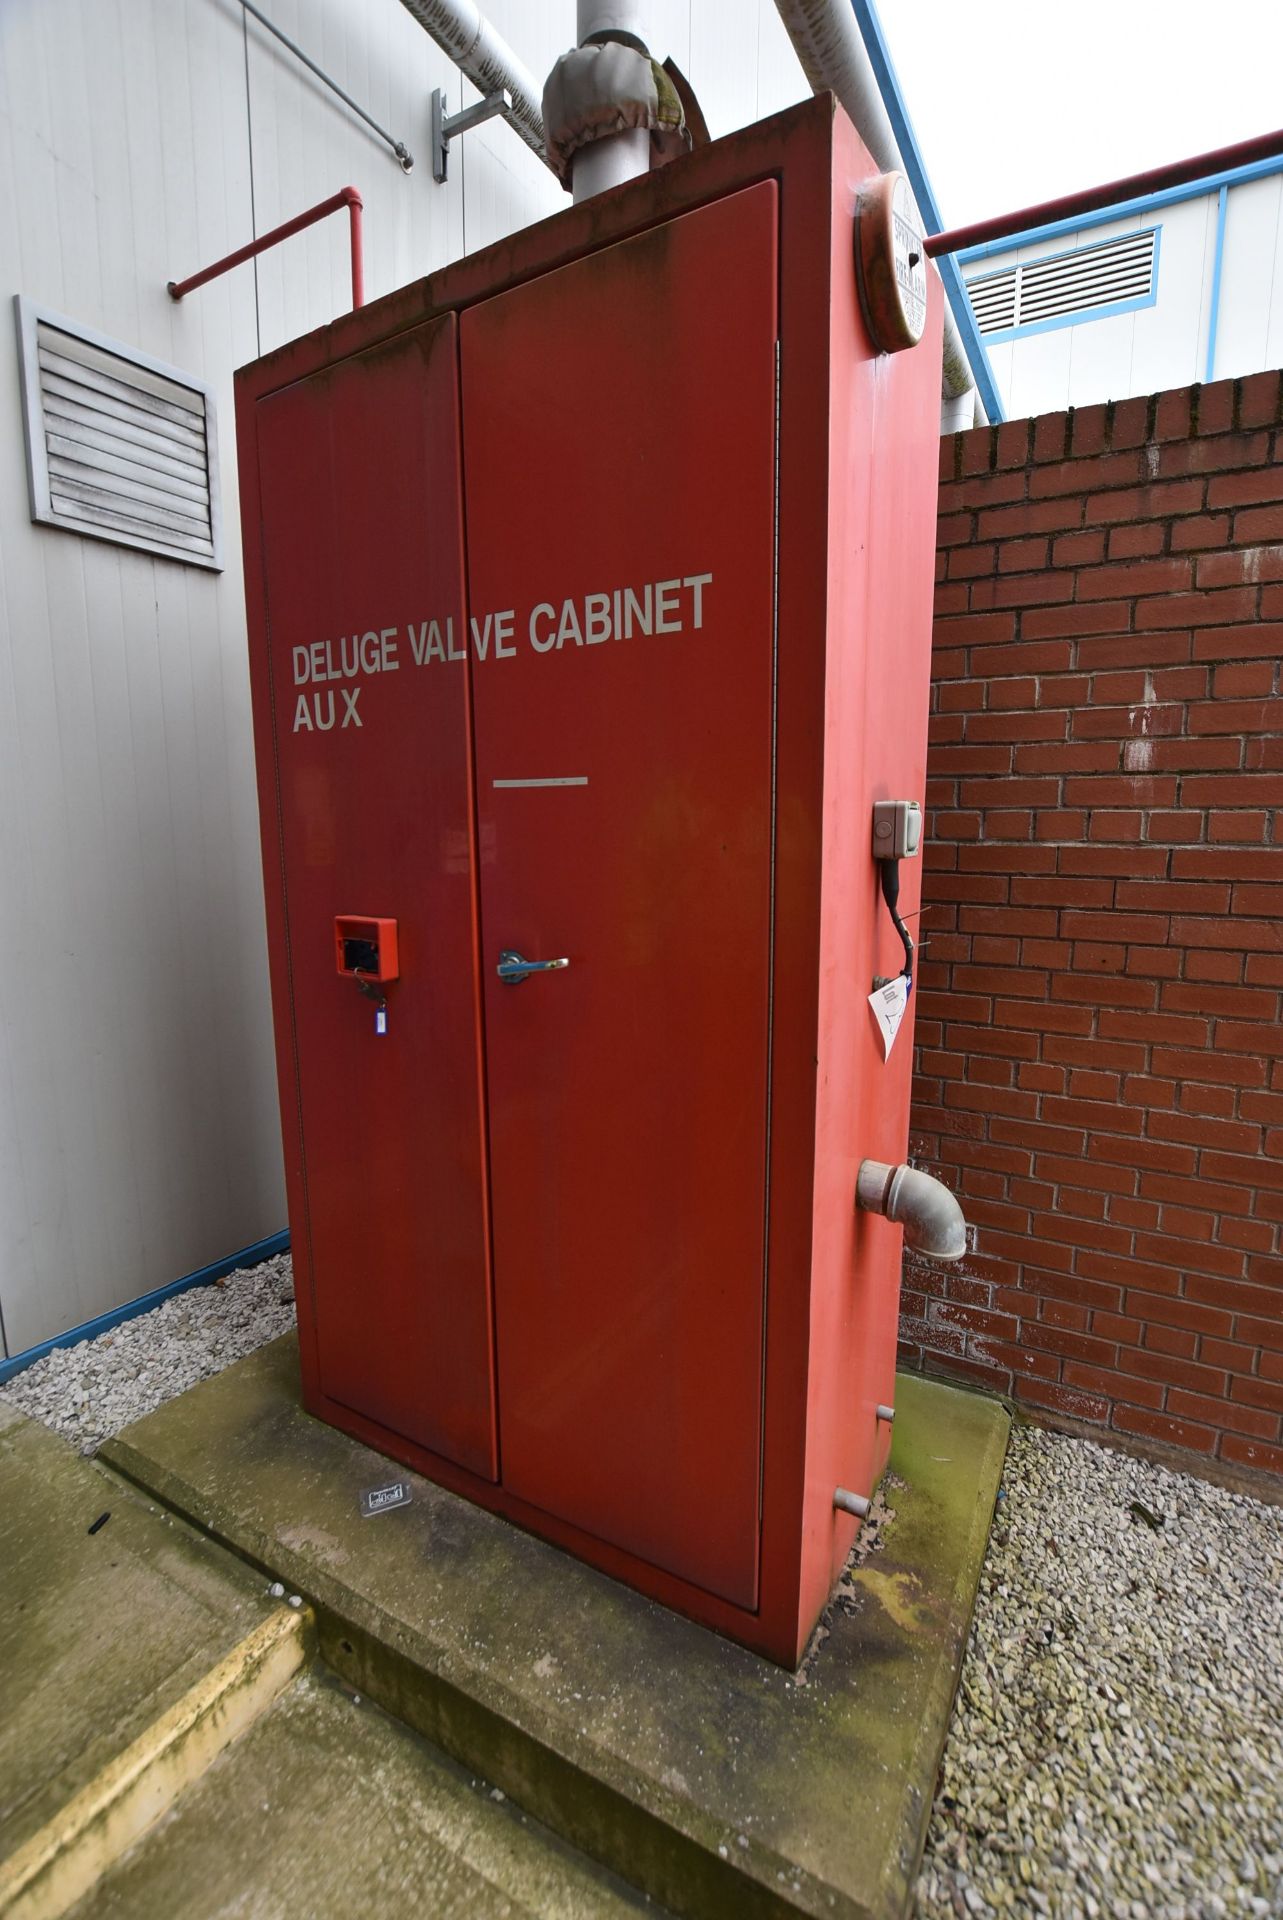 Deluge Valve Cabinet (Auxiliary), approx. 1.3m x 600mm x 2.4m high, with equipment throughout (There